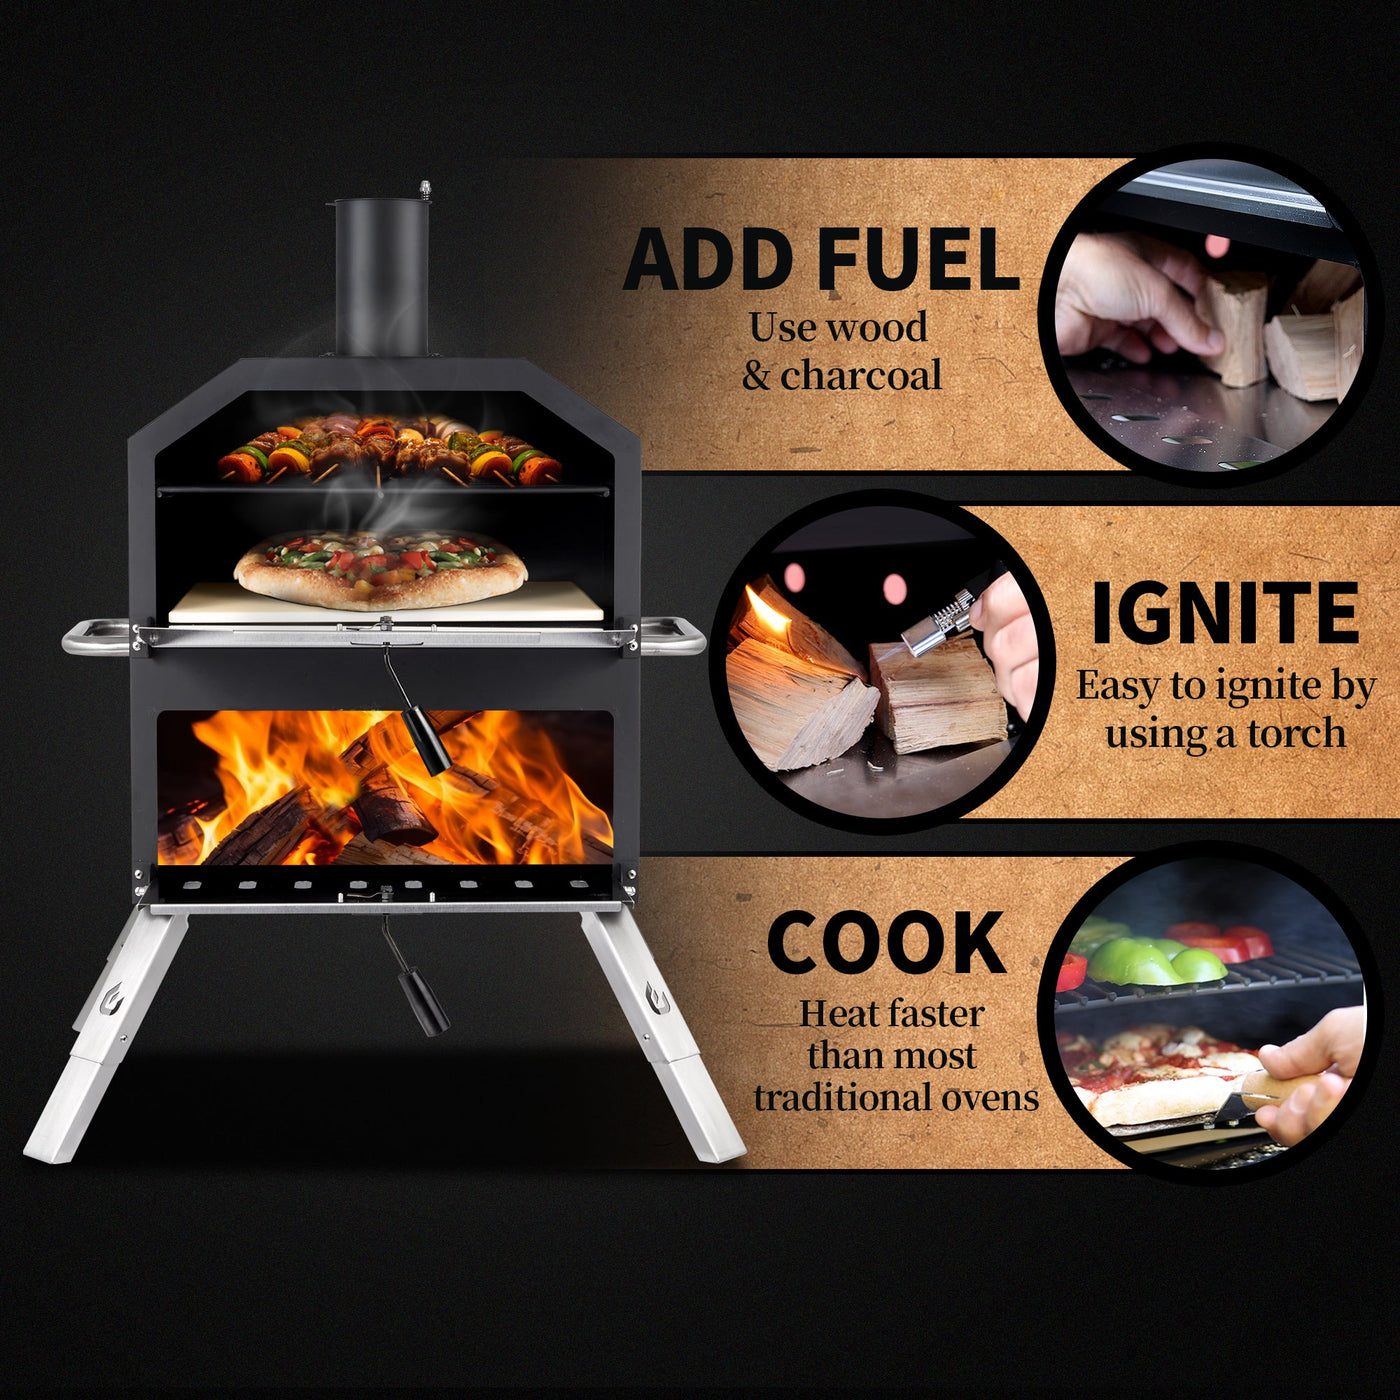 Pizzello Grande - Outdoor 2-Layer Pizza Oven Bundle with FREE Accessor